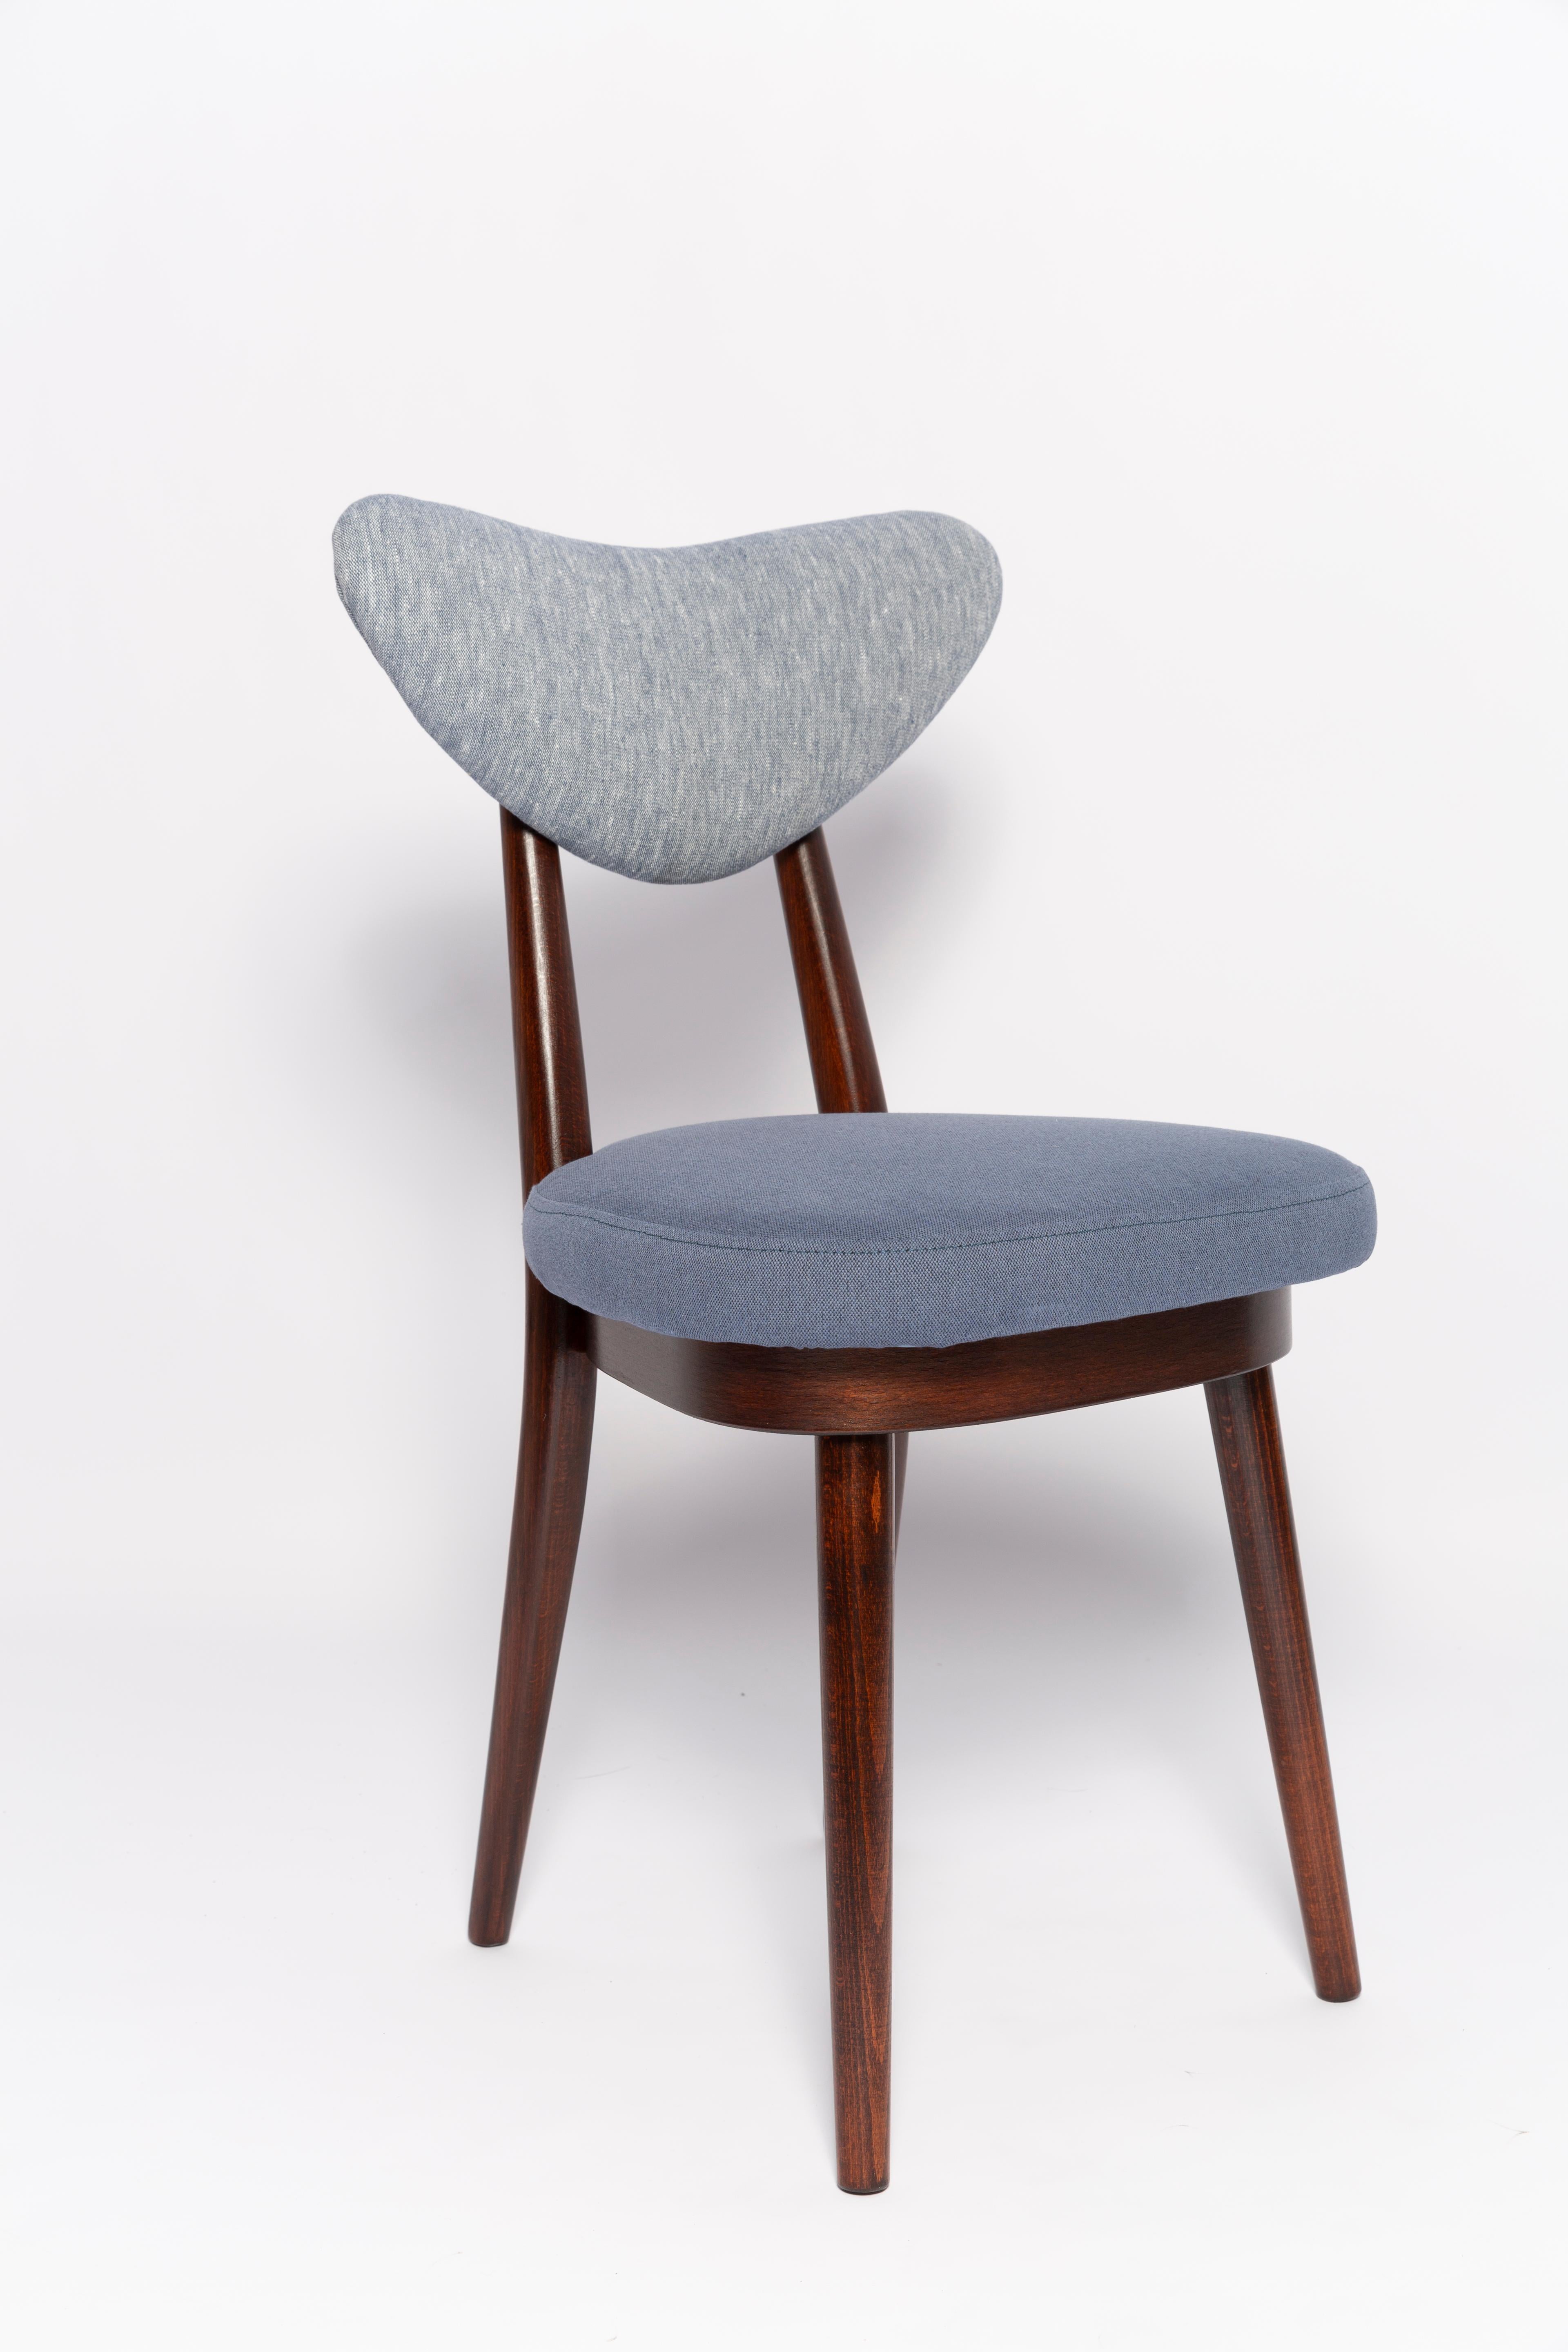 Hand-Crafted Mid Century Light and Medium Blue Denim Heart Chair, Europe, 1960s For Sale